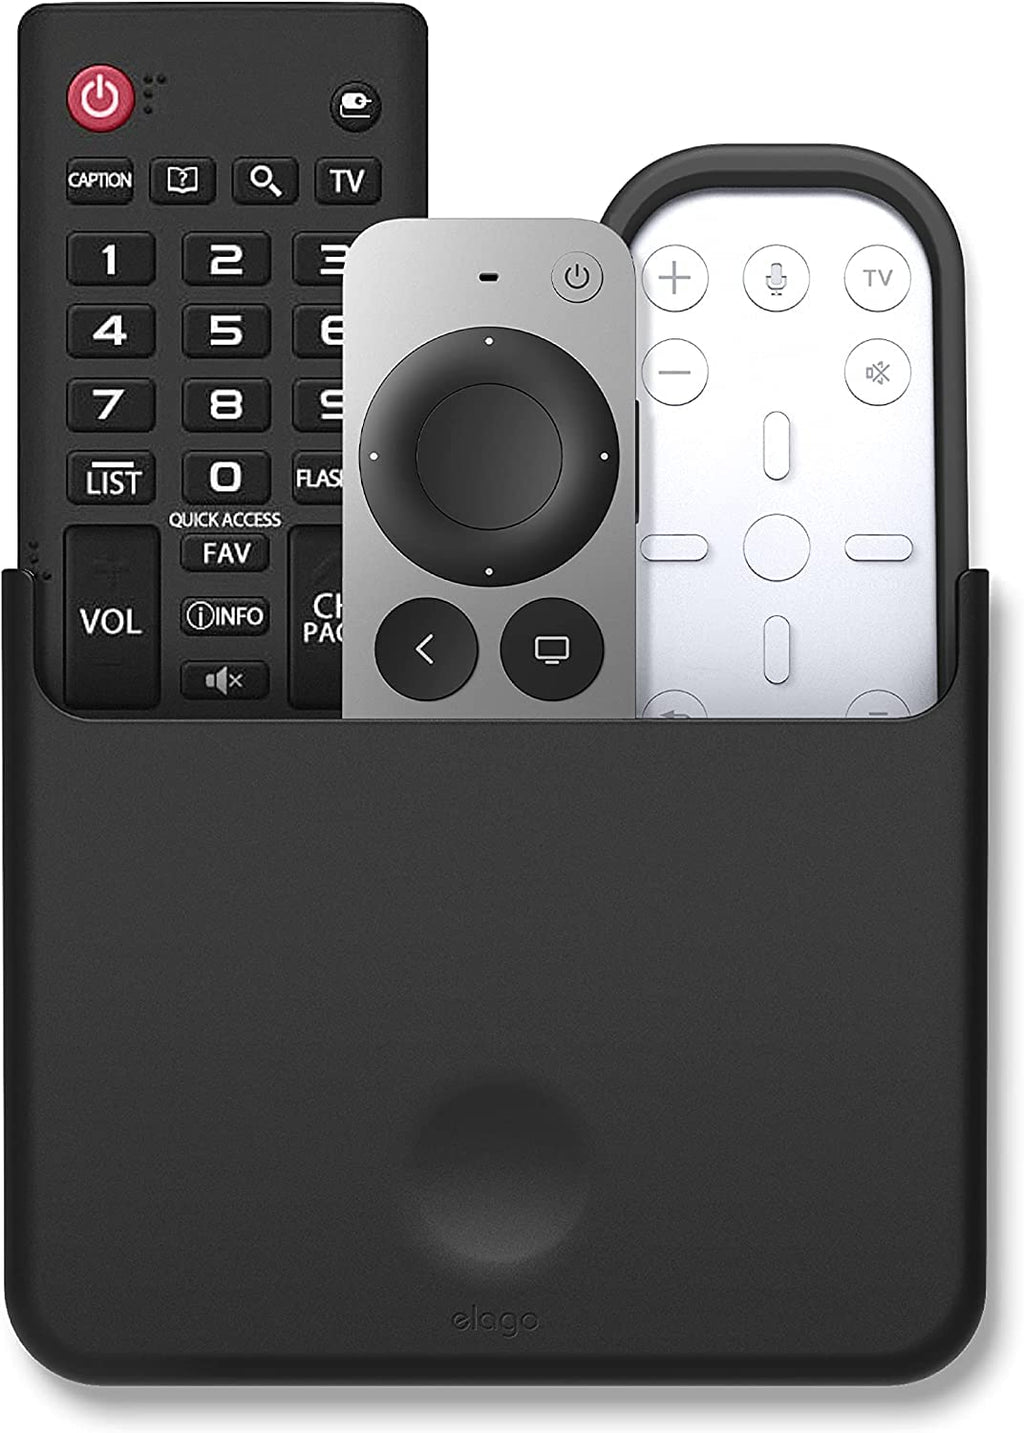 elago Universal Remote Holder Mount Compatible with Apple TV Remote and All Other Remote Controls - Adhesive Tape or Screw Mounting Options, Available Wired Charging [Large] [Black] Black